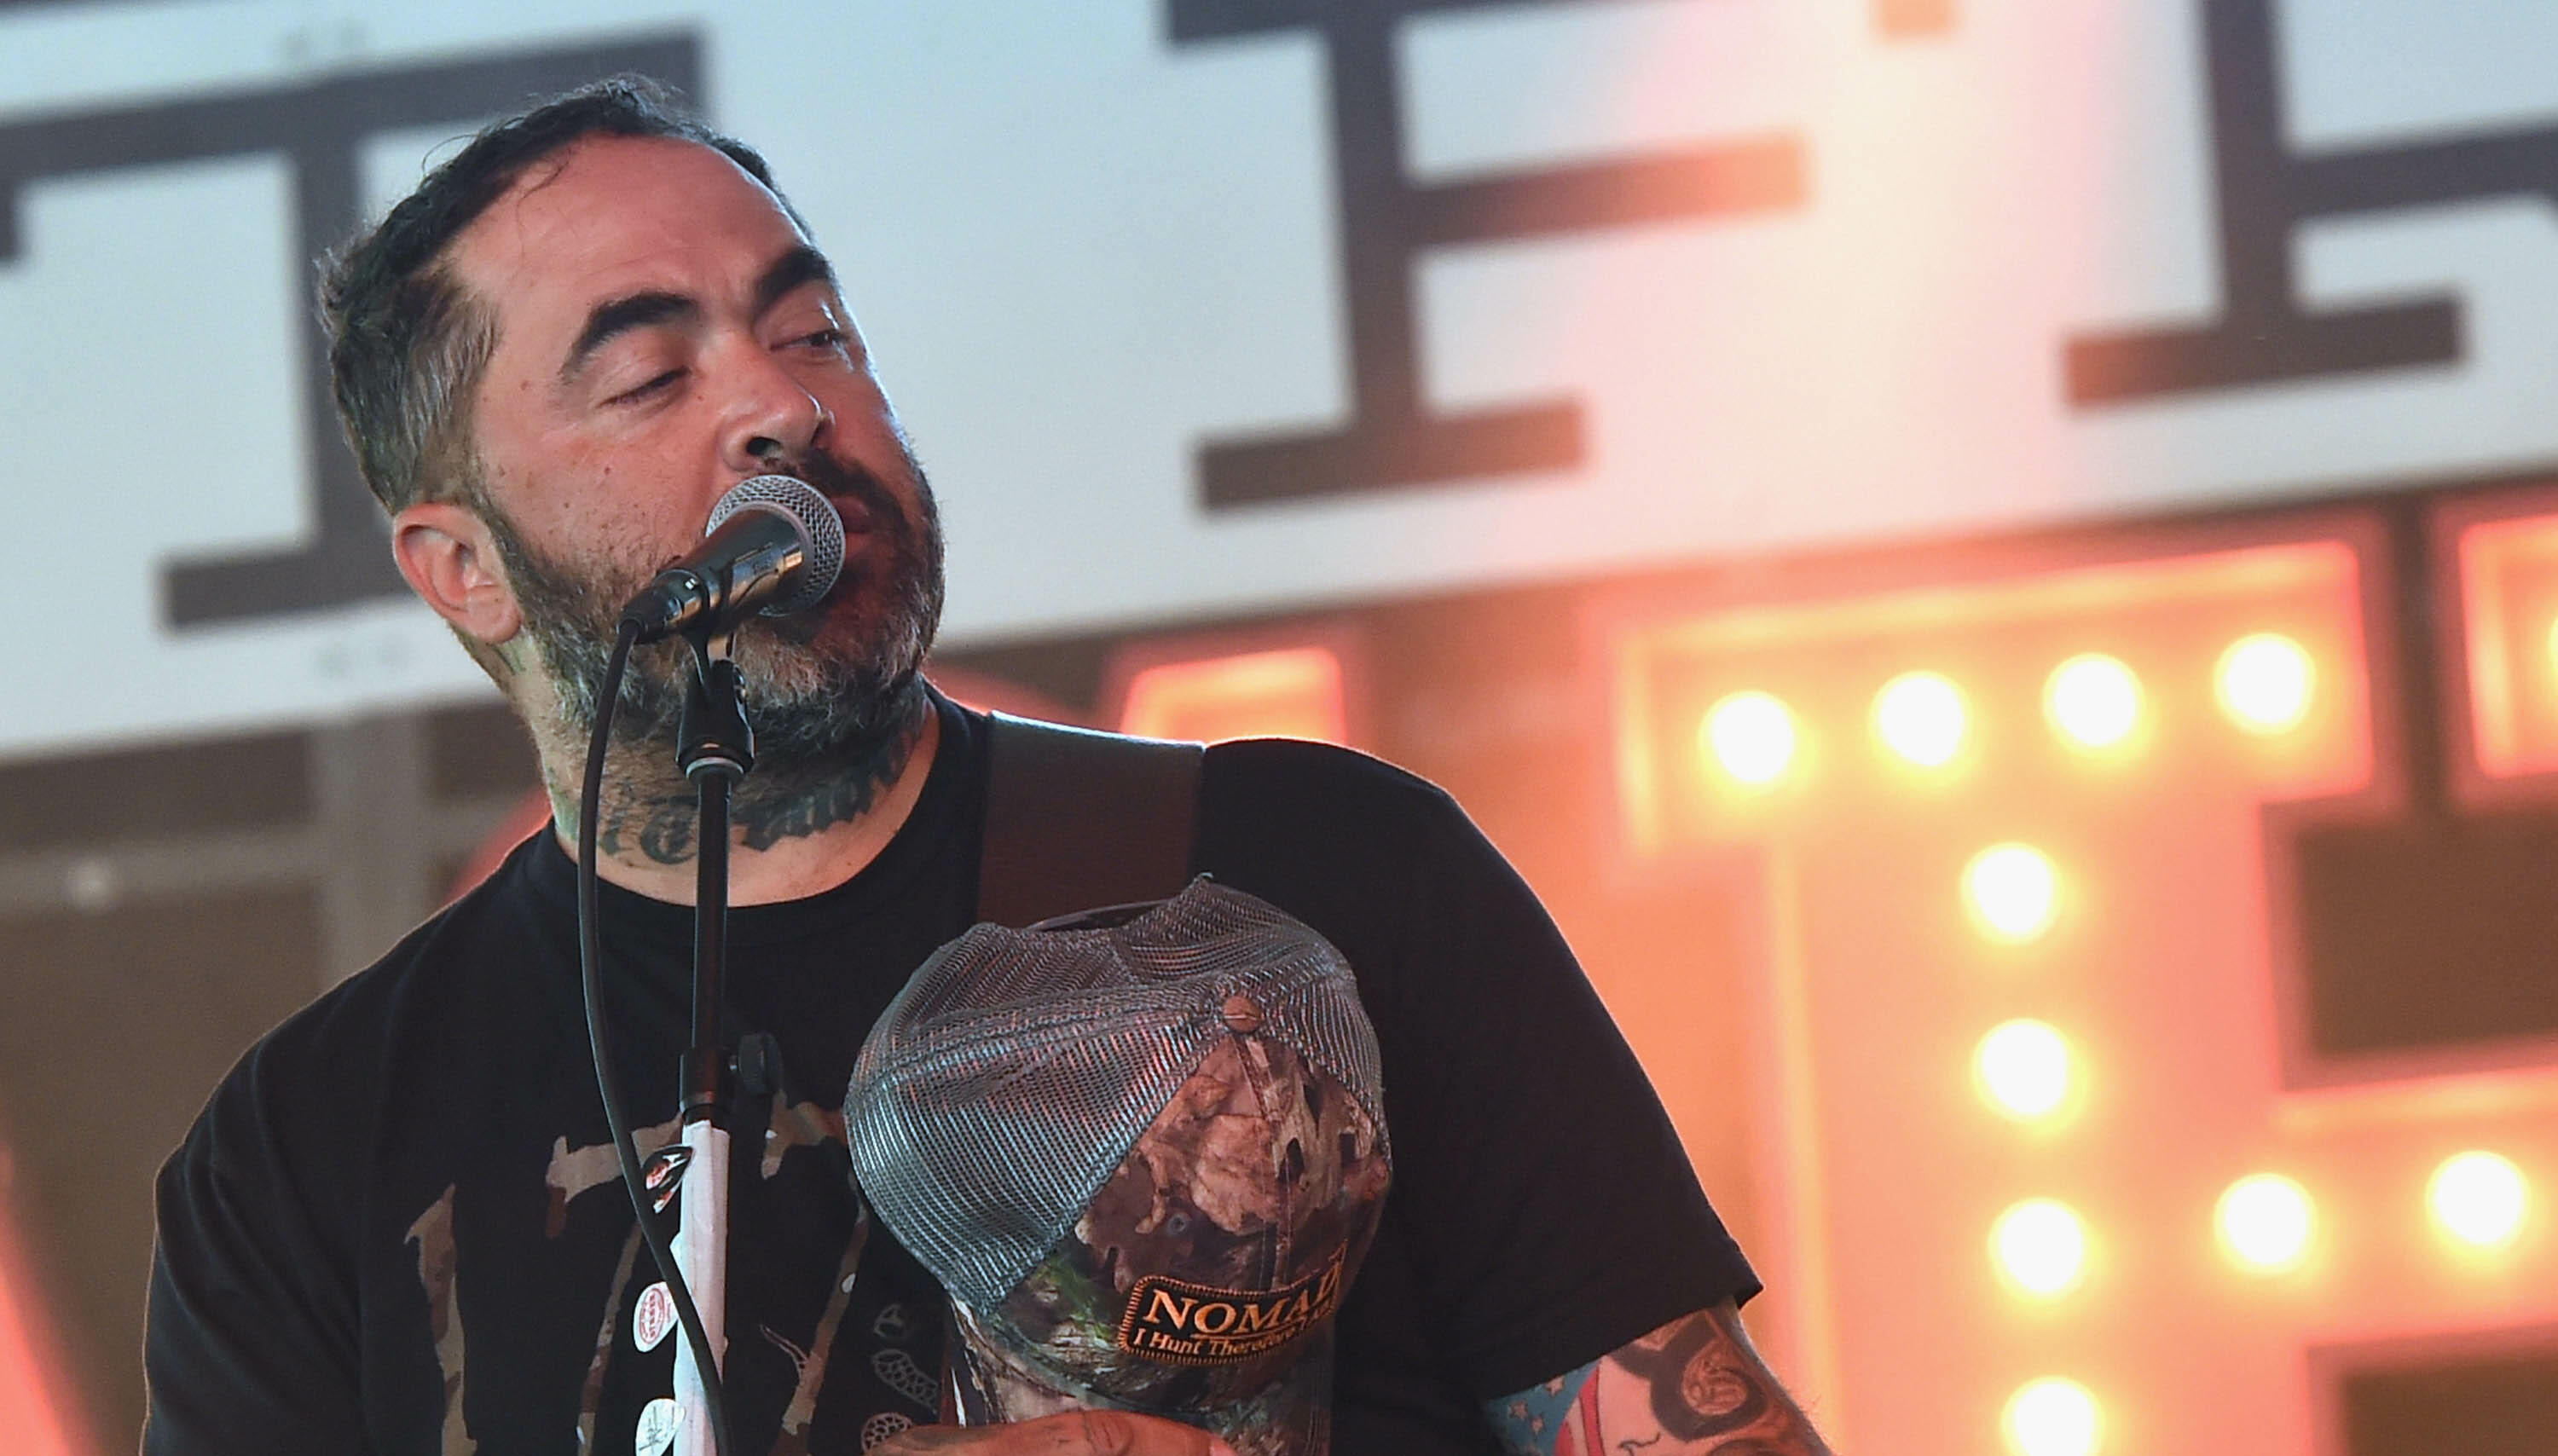 Aaron Lewis Ends Another Concert Early: "Shut the F--k Up or I'm Done